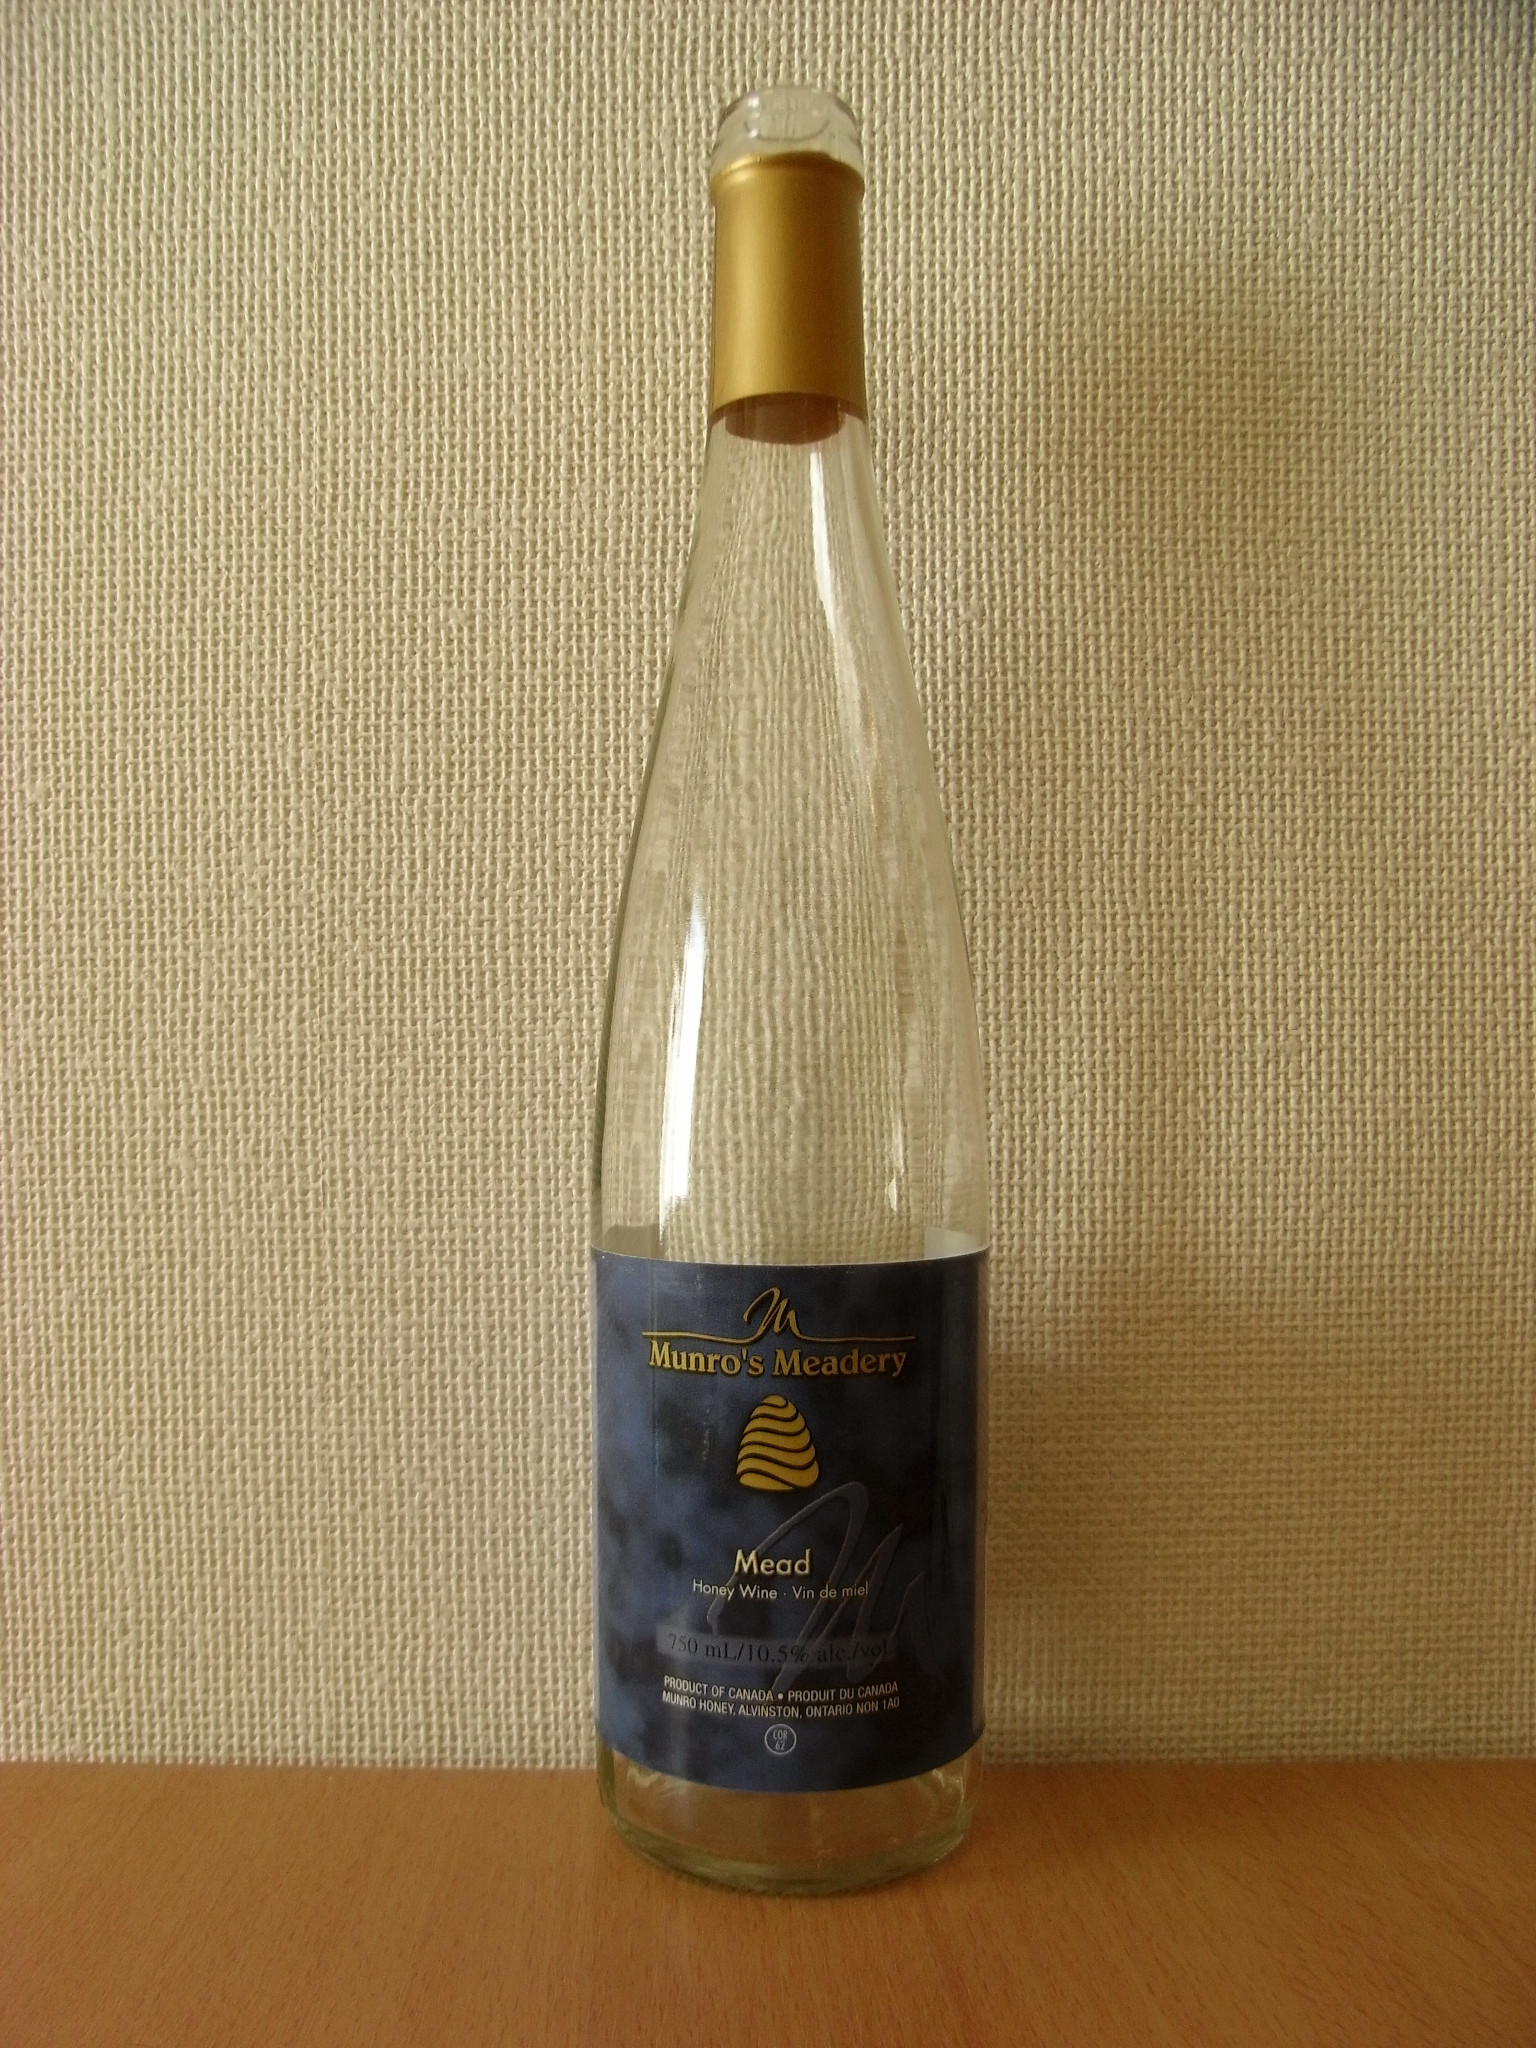 Munro's meadery Mead